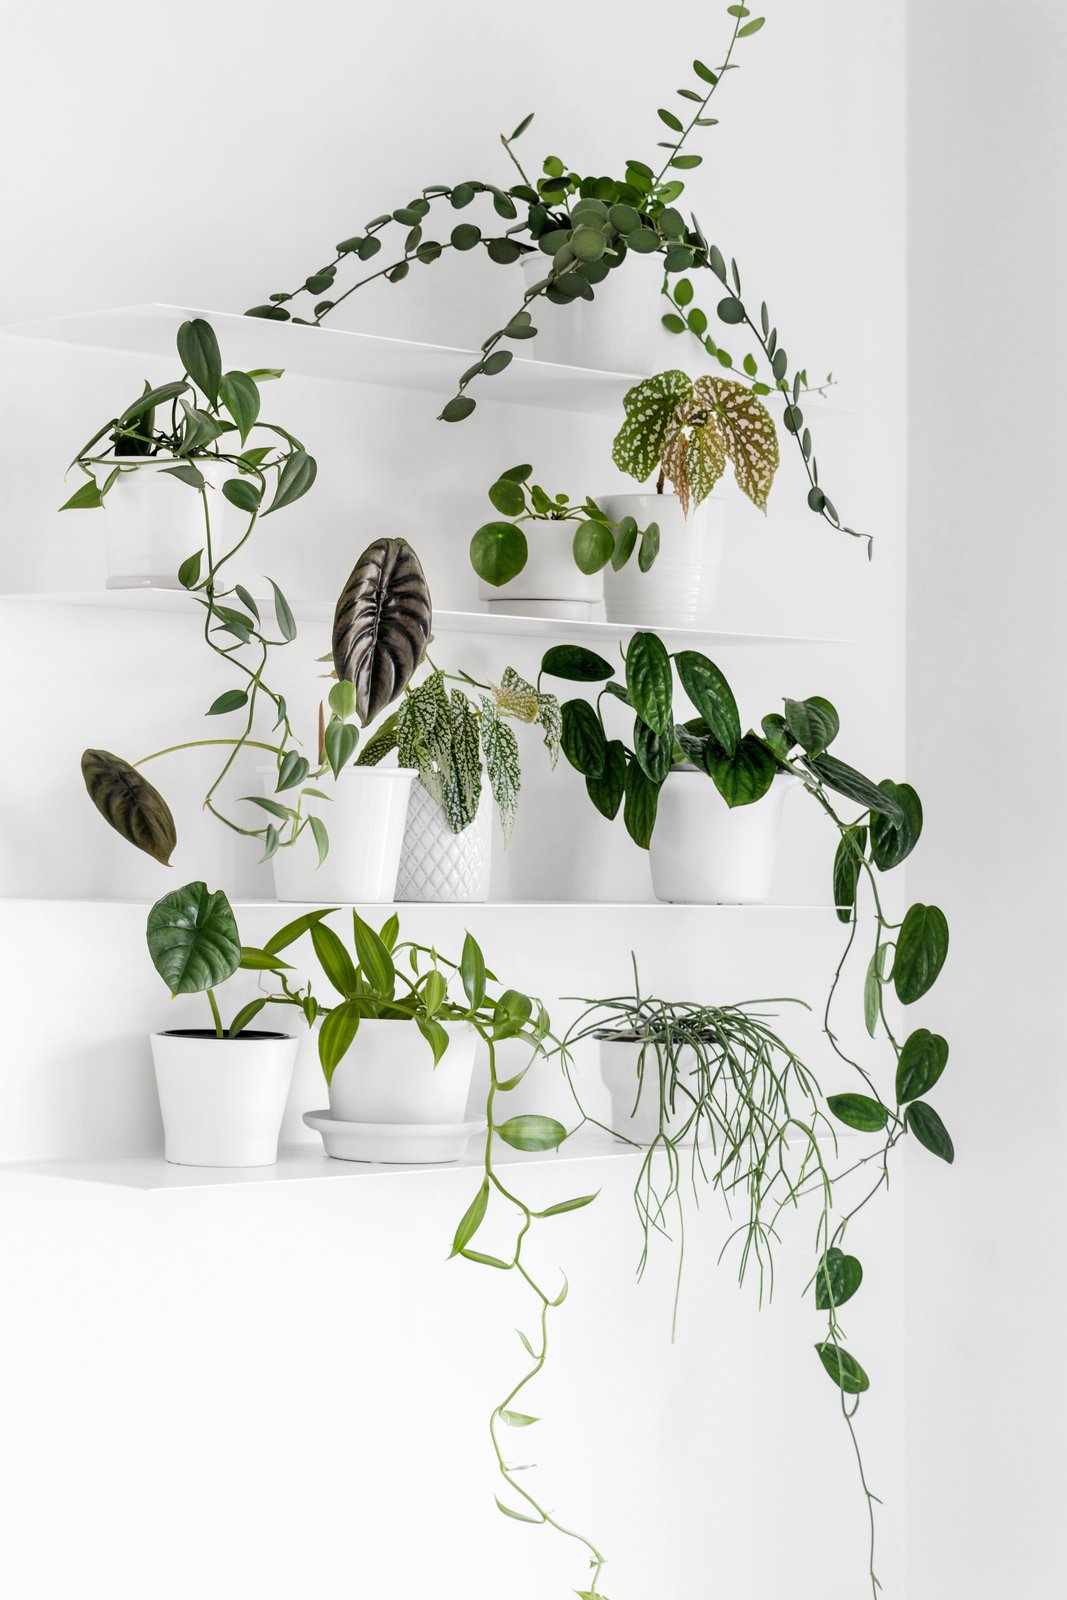 20 creative indoor plant decorating ideas and none of them are ...